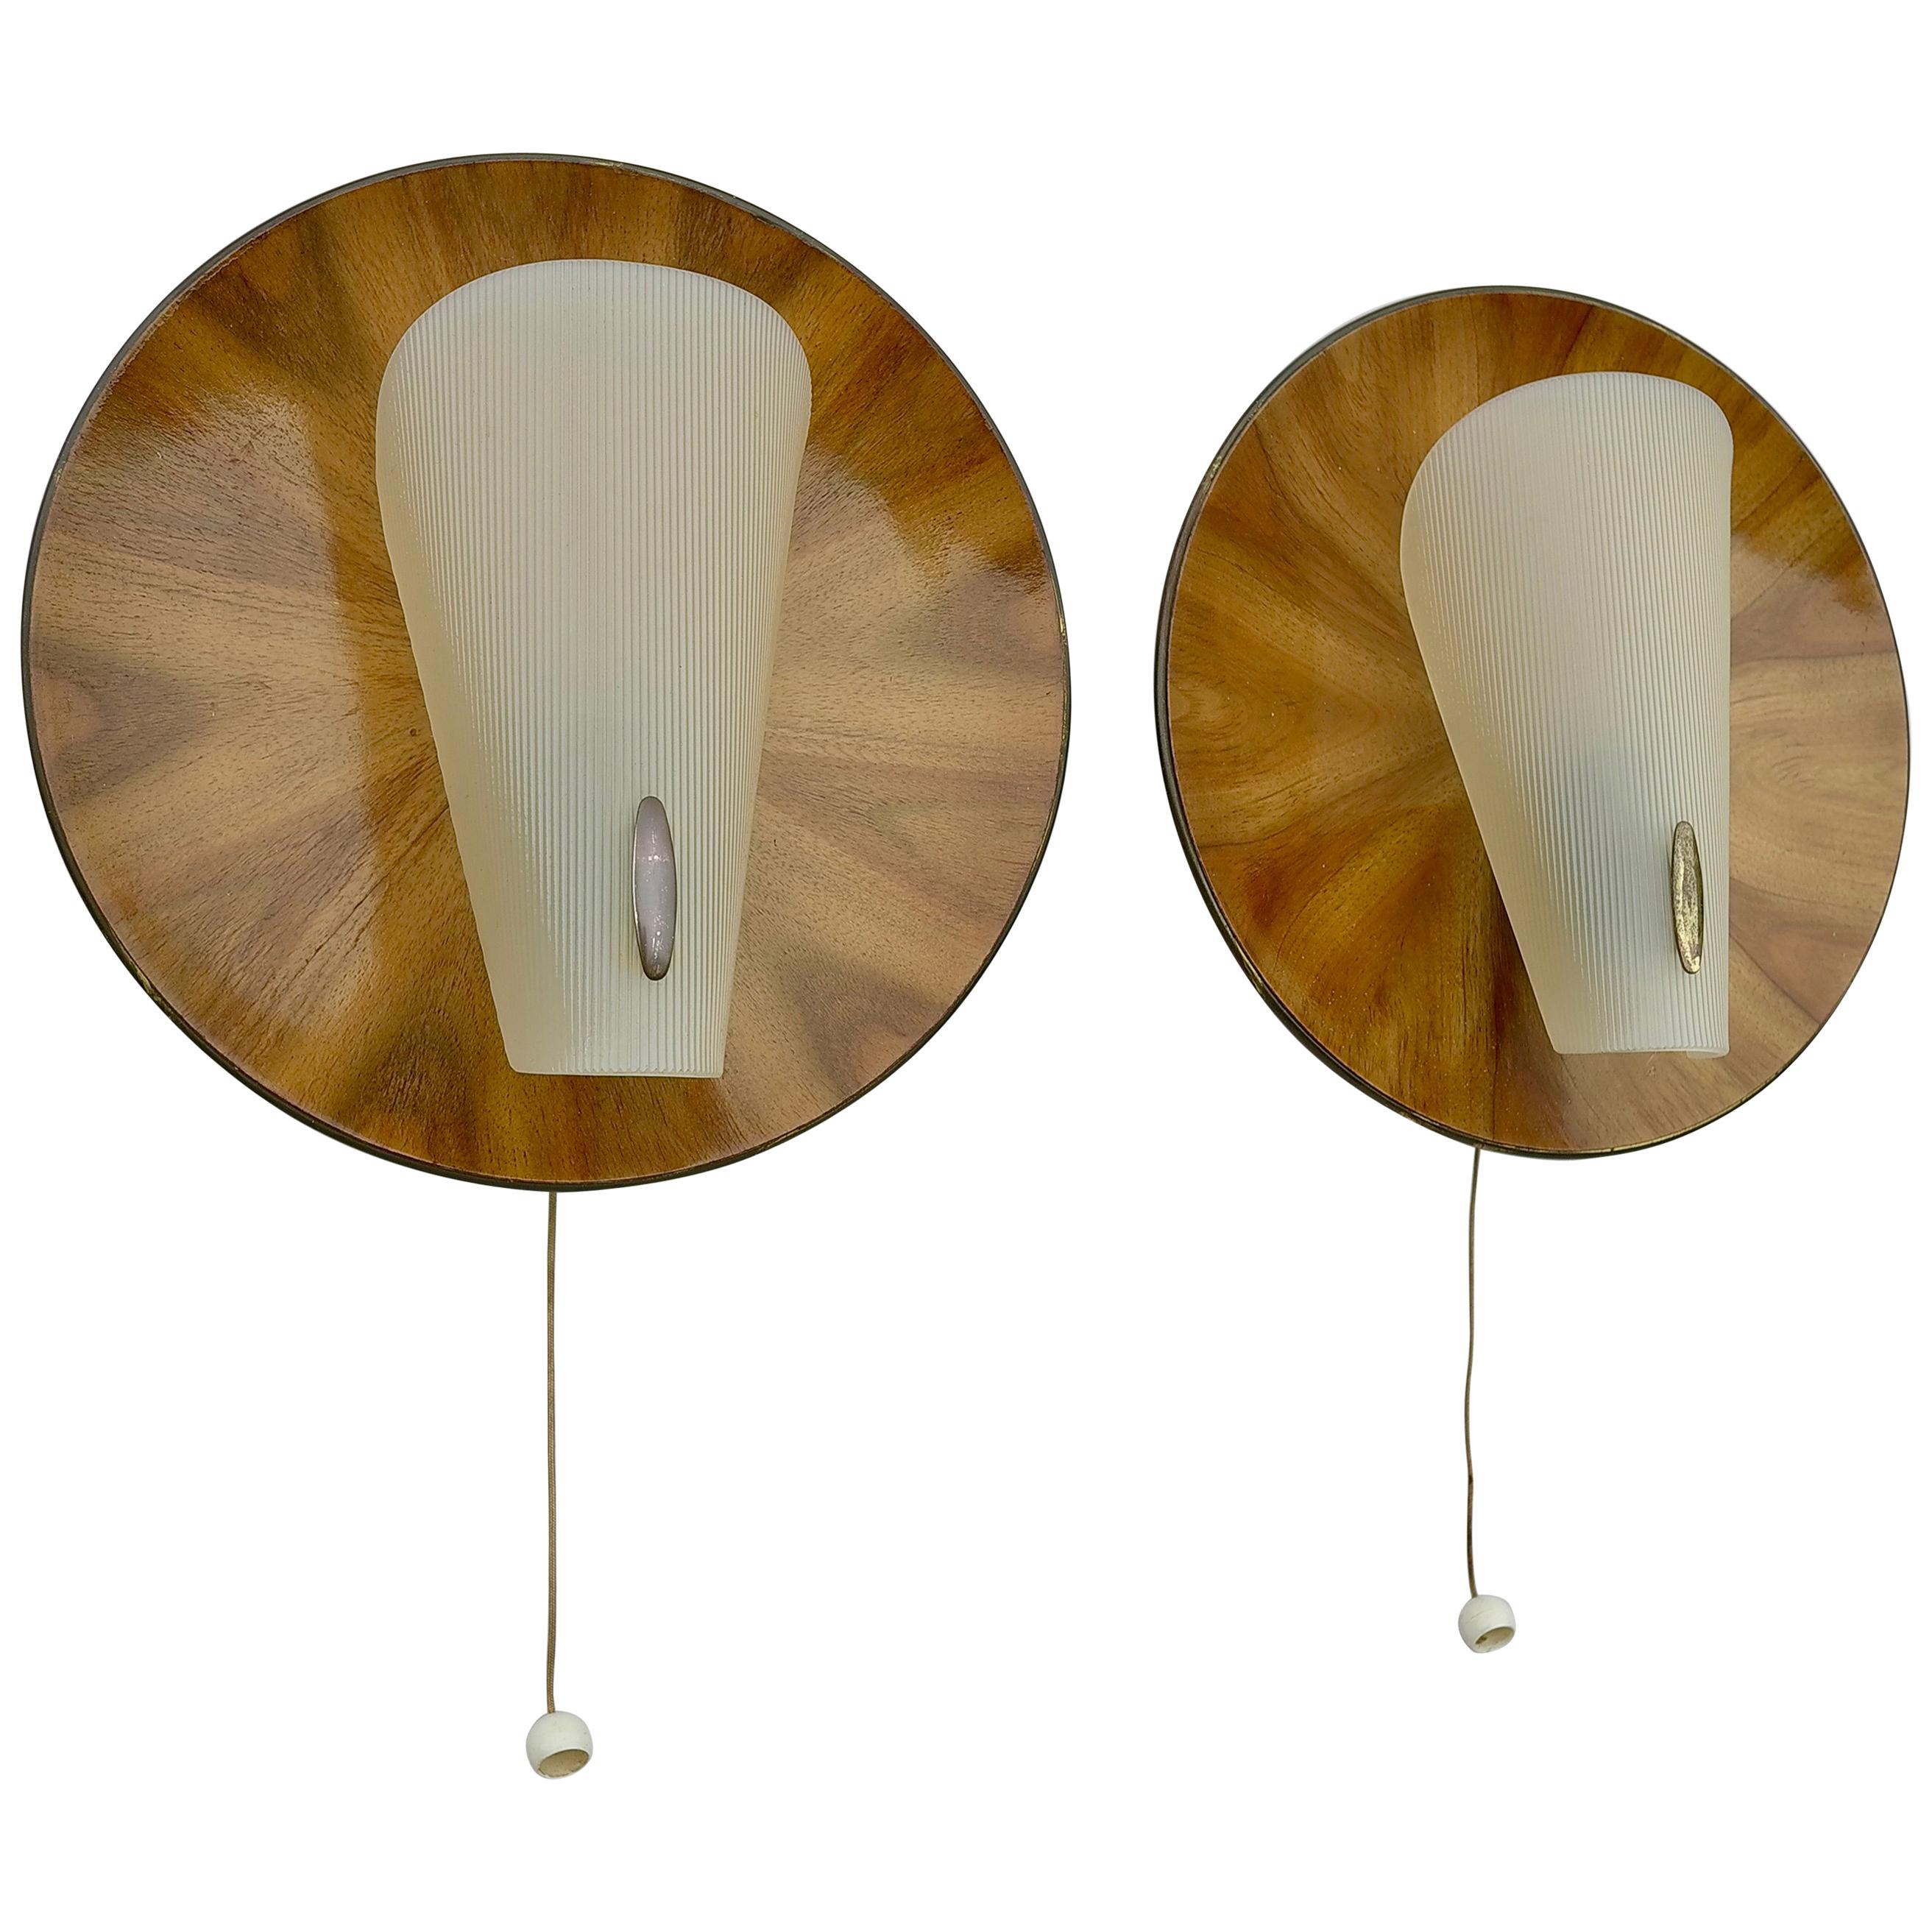 Pair of Wooden Wall Bed Lamps with Fine Brass Details, Italy, 1950s For Sale